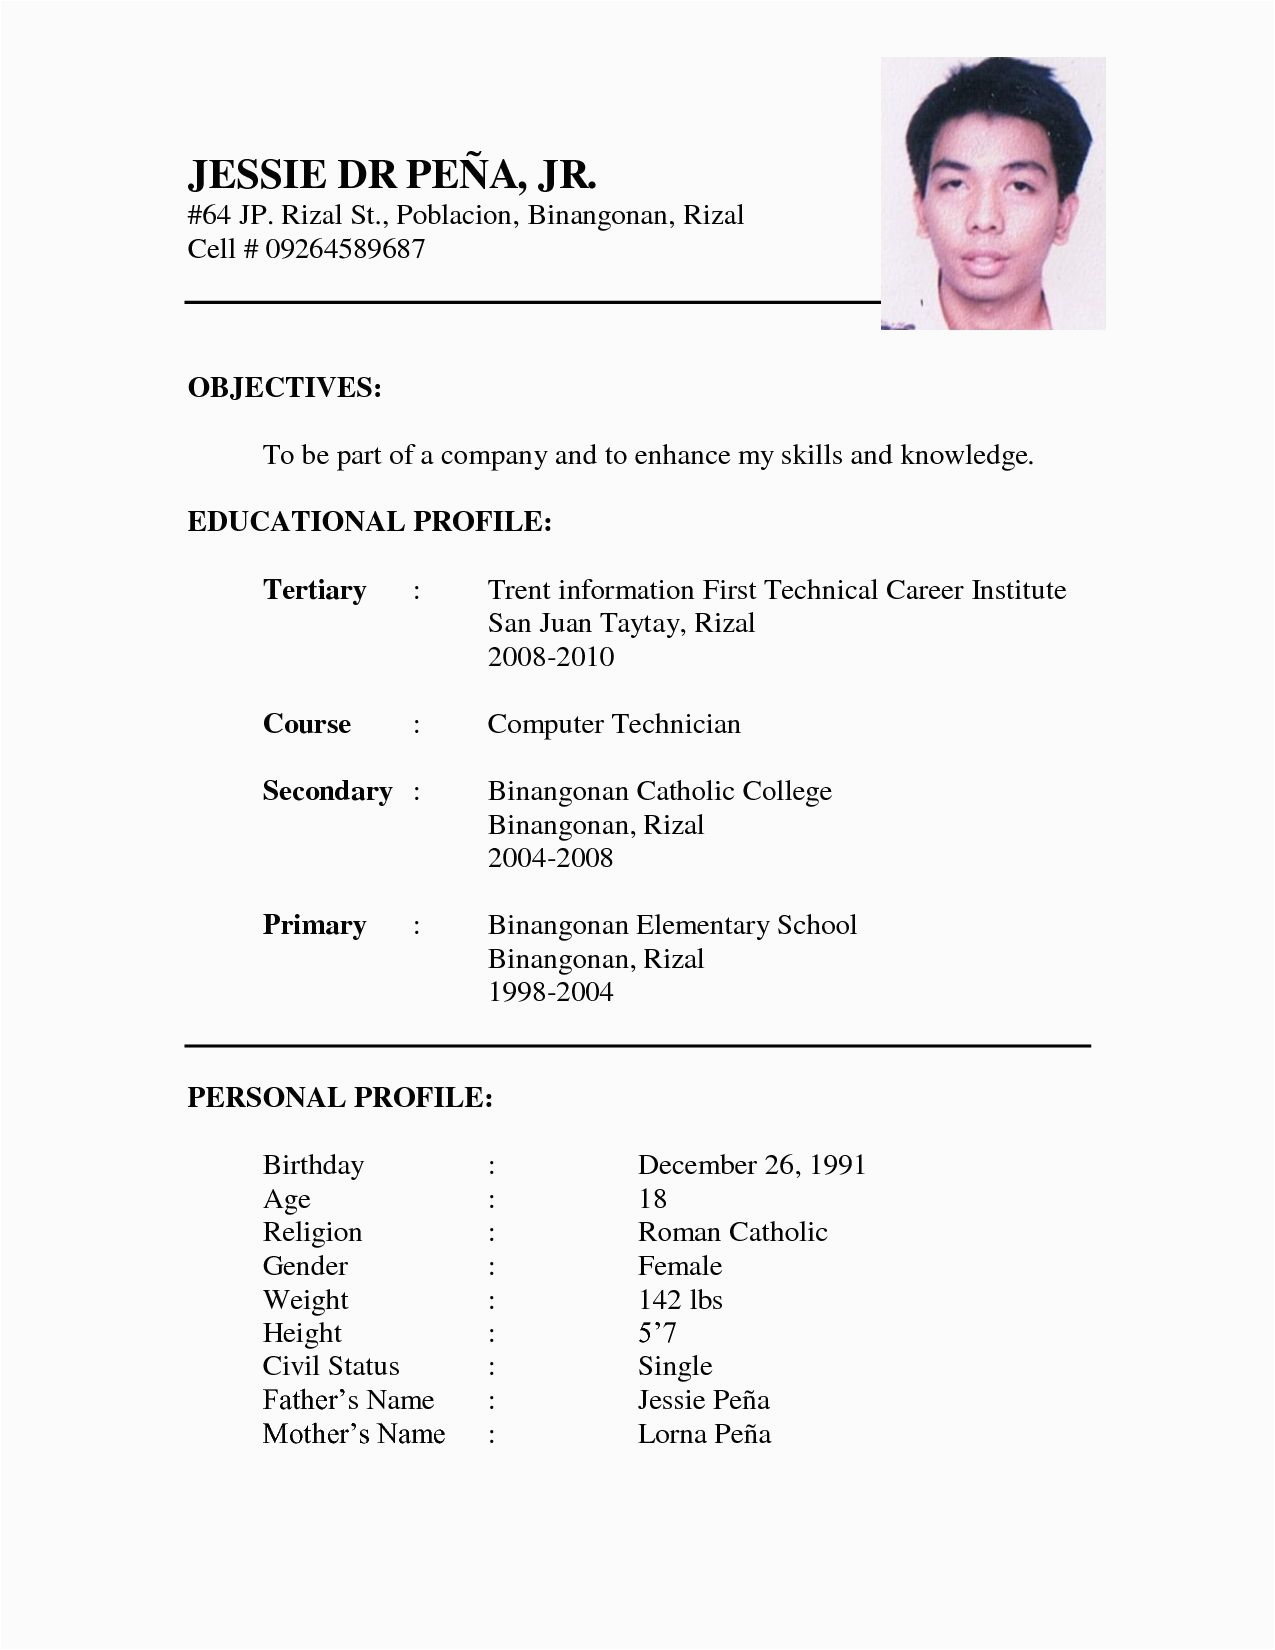 Sample Of Simple Resume for Job Application Job Application Simple Resume format for Job Restume